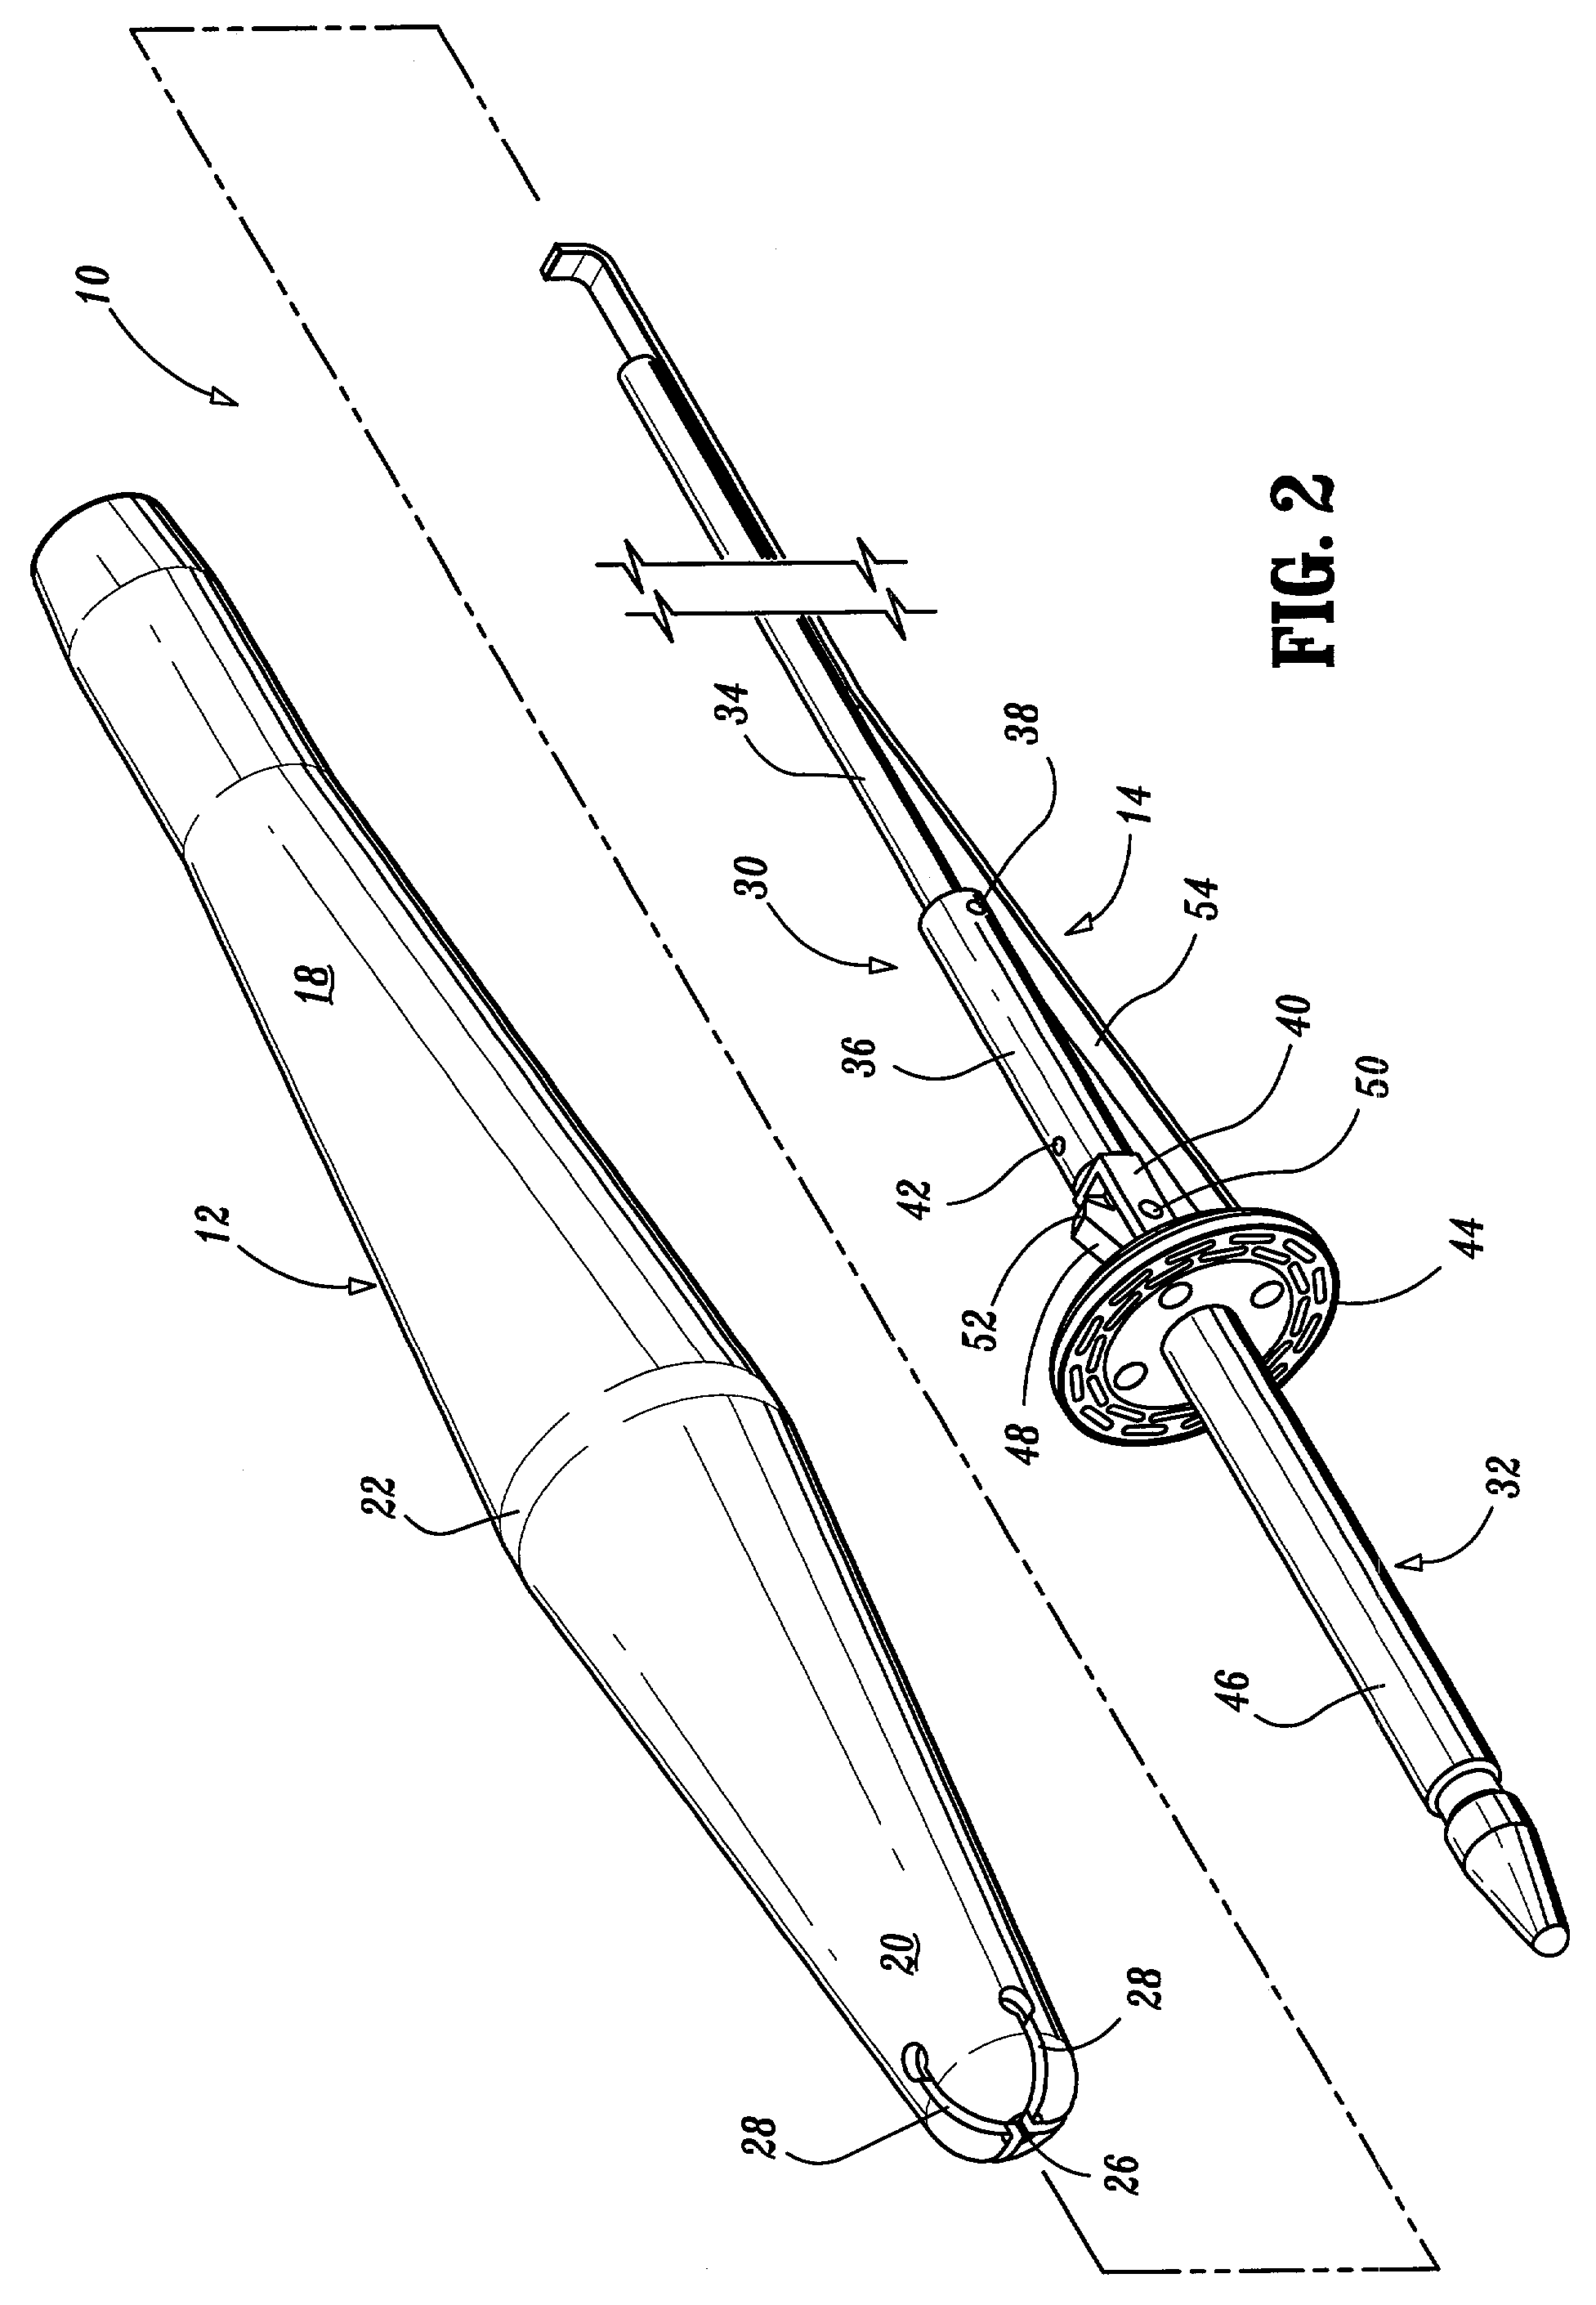 Apparatus and method for performing a bypass procedure in a digestive system